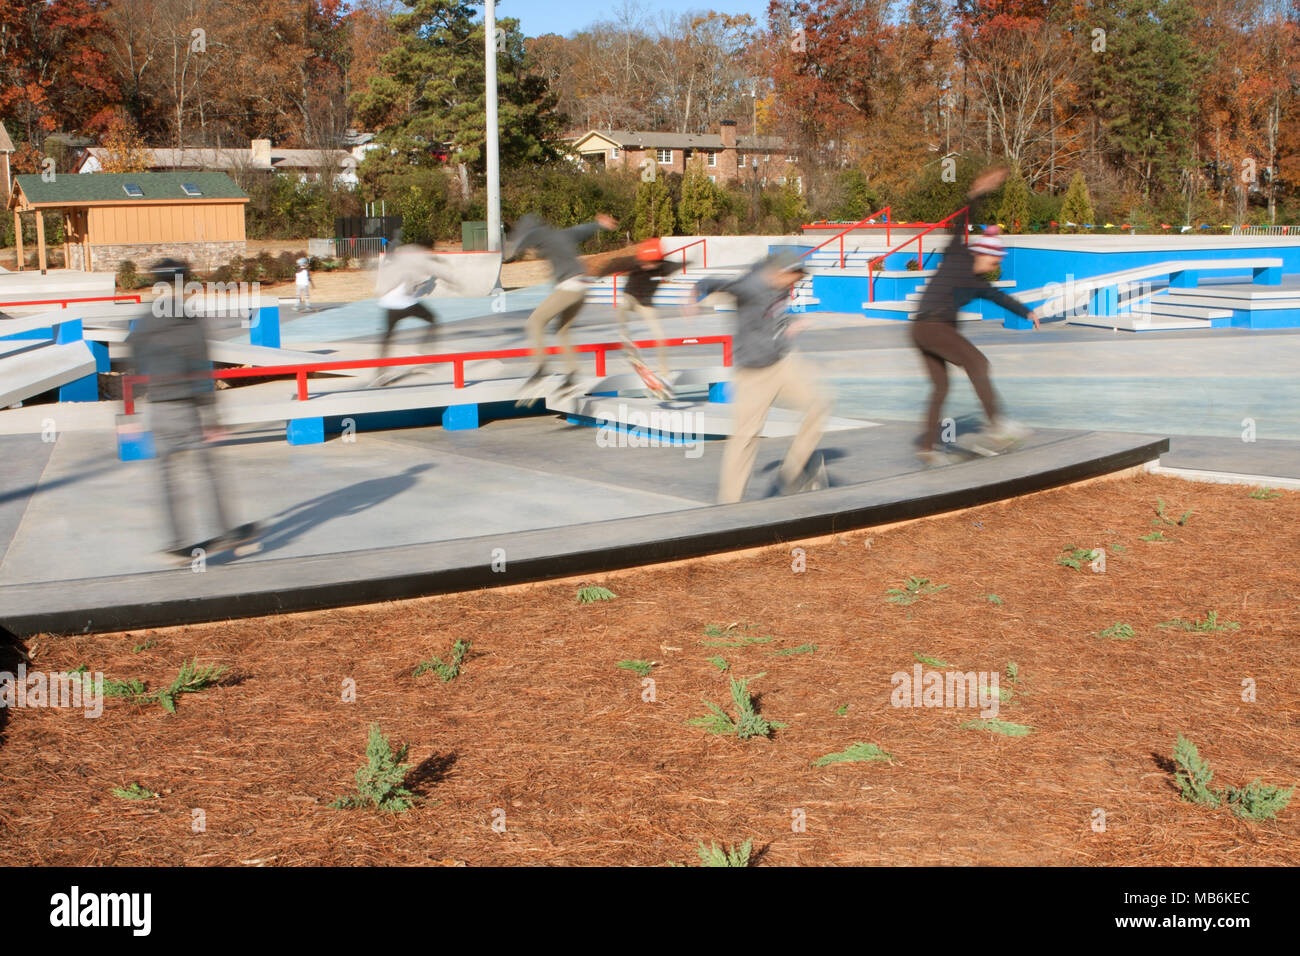 A composite of several motion blurs shows skateboarders taking part in the grand opening of the skateboard park in Kennesaw, GA on November 24, 2013. Stock Photo